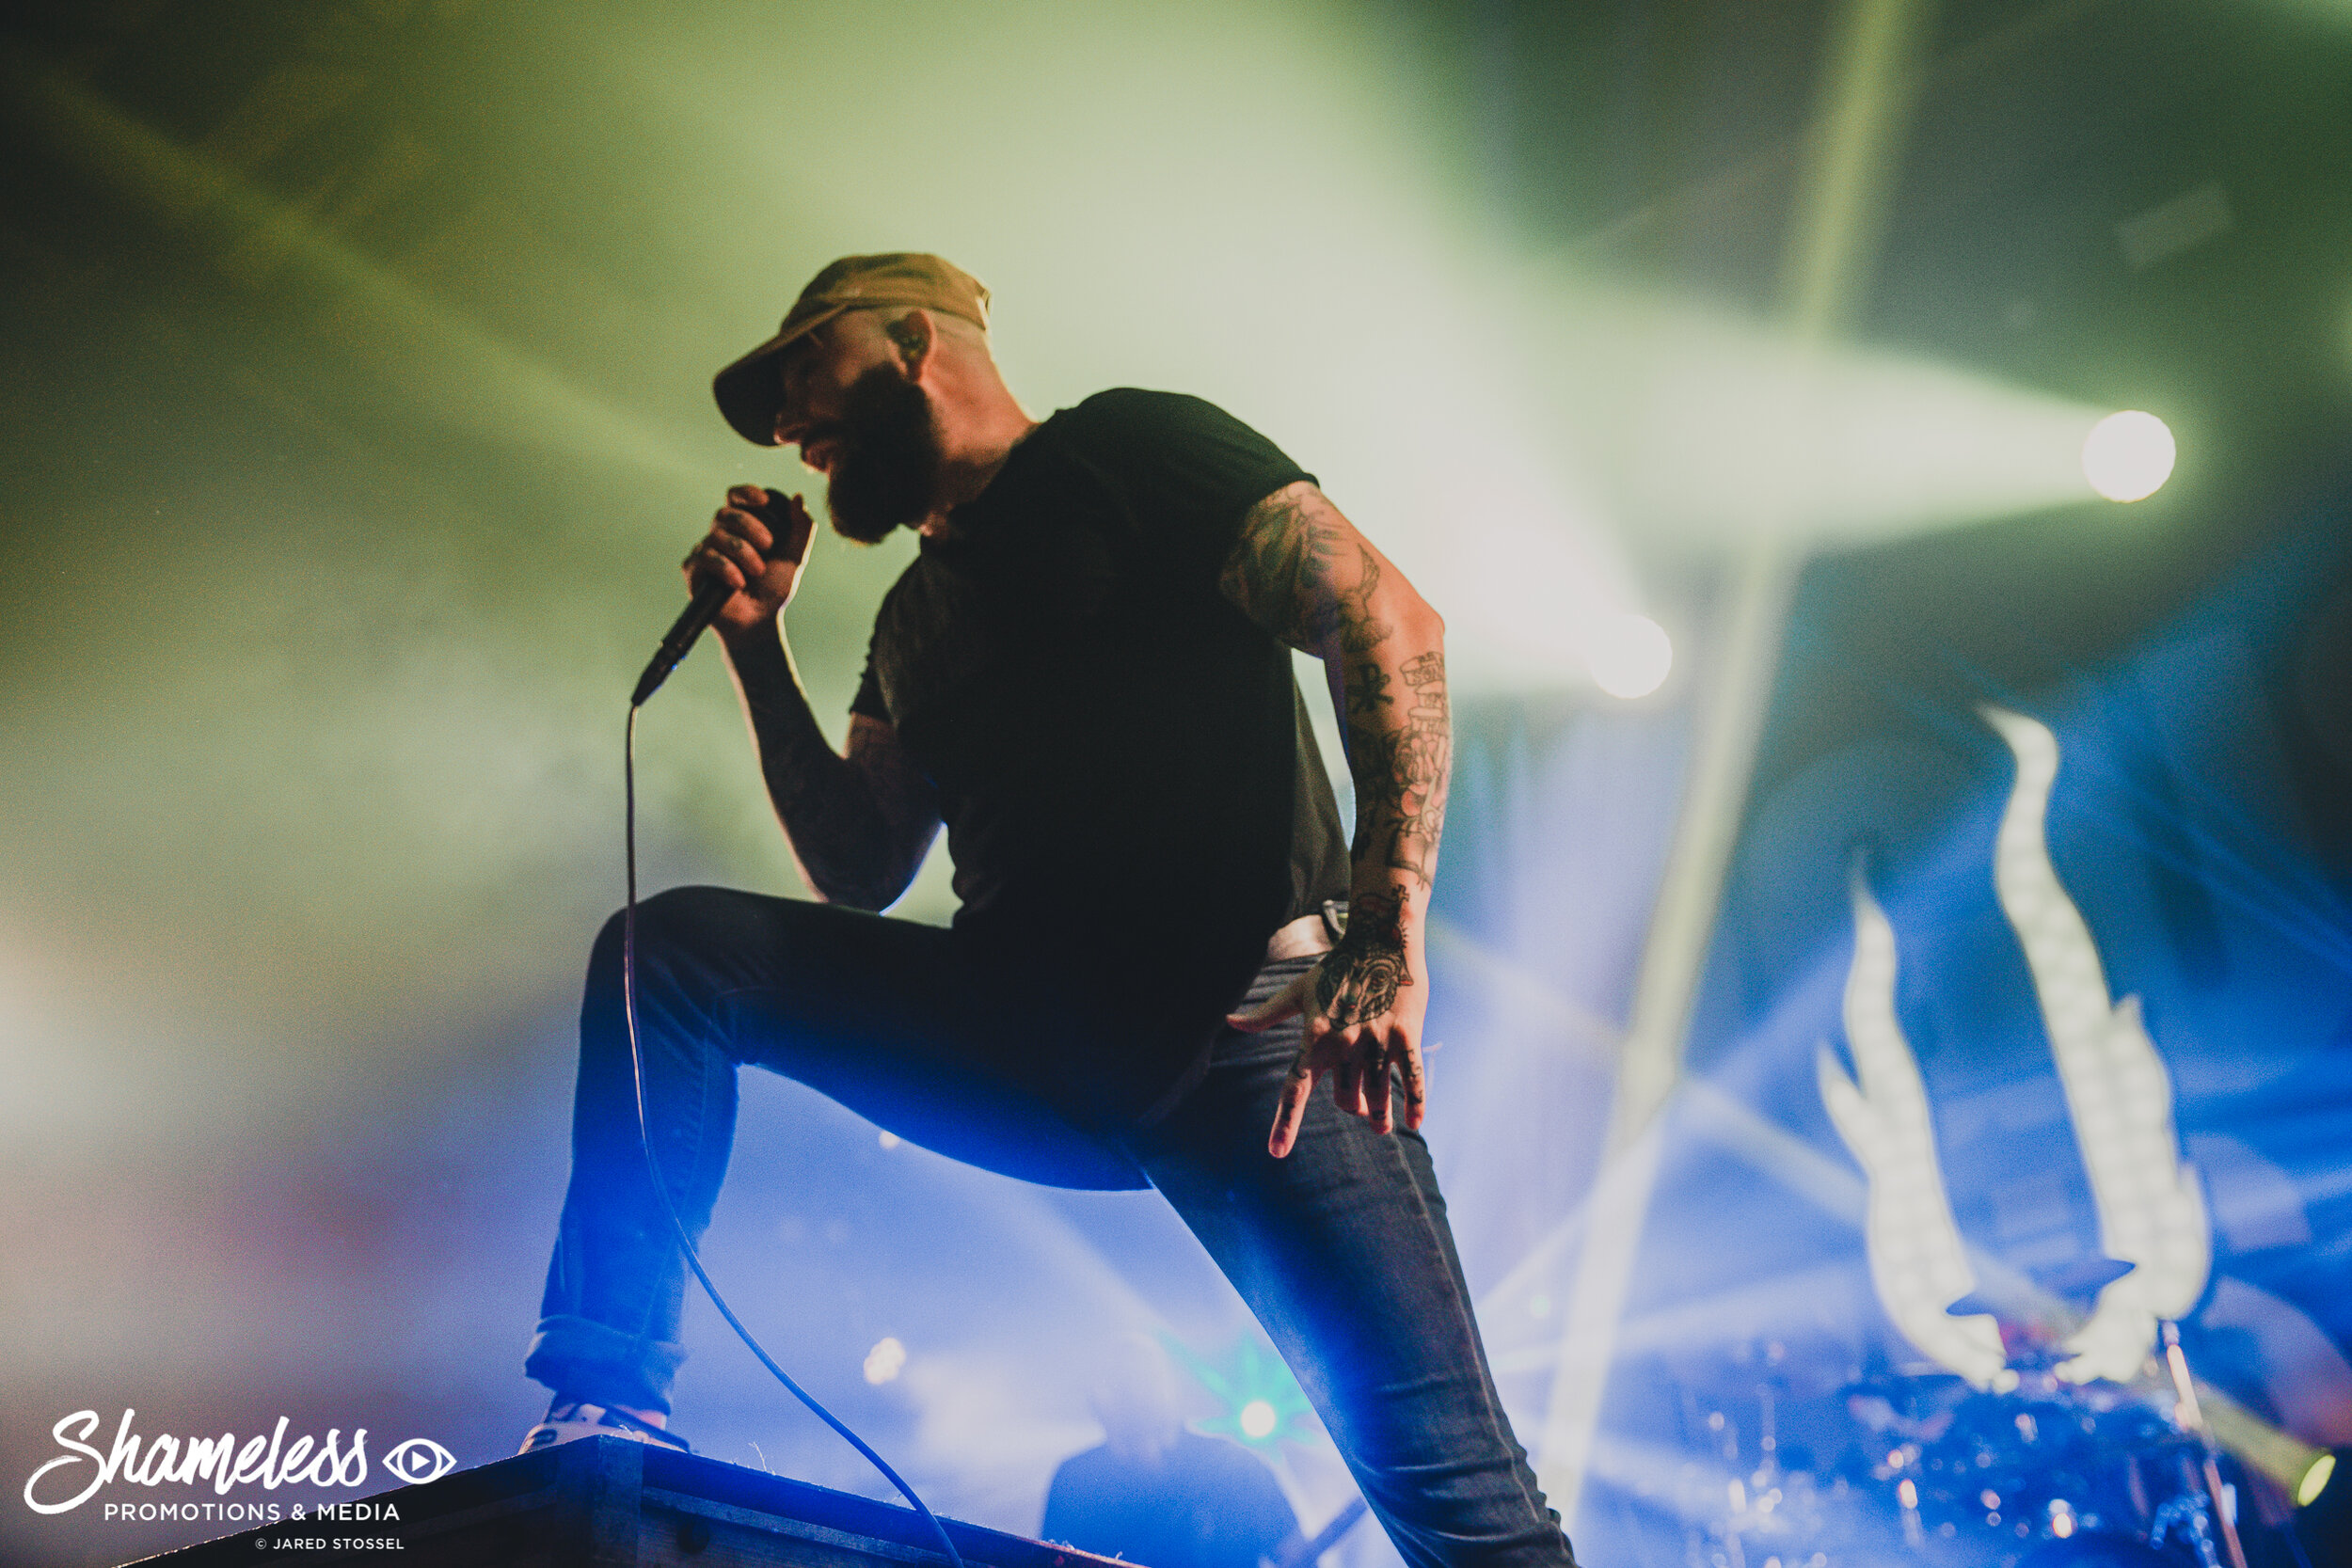 August Burns Red @ The UC Theatre: October 2021